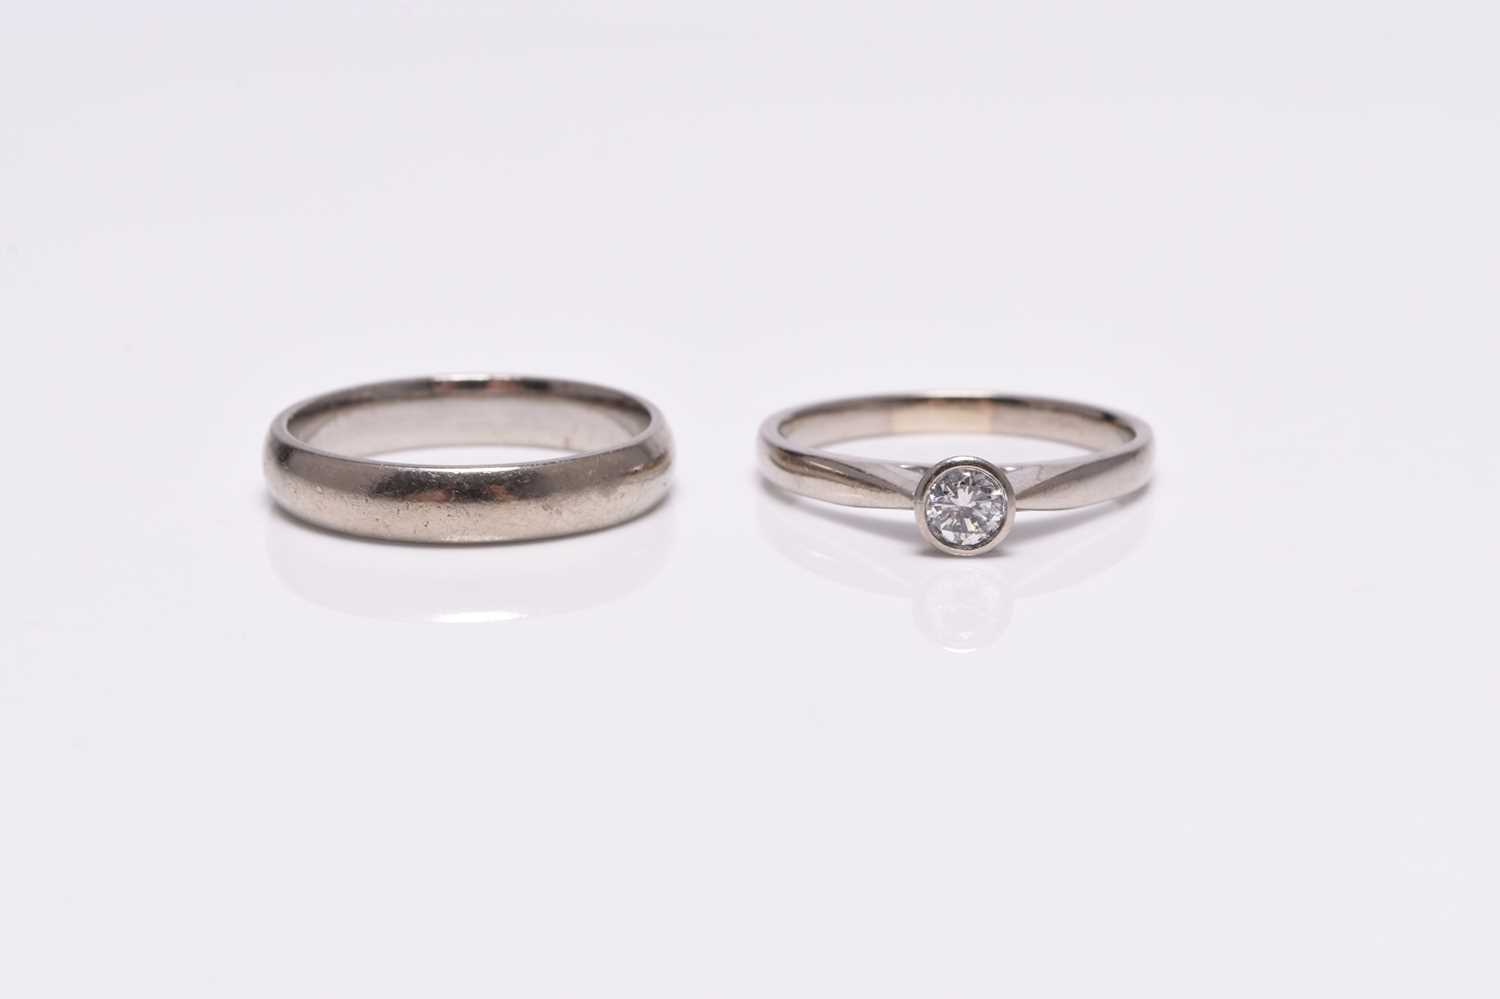 An 18ct white gold single stone diamond ring and an 18ct gold wedding band - Image 2 of 2